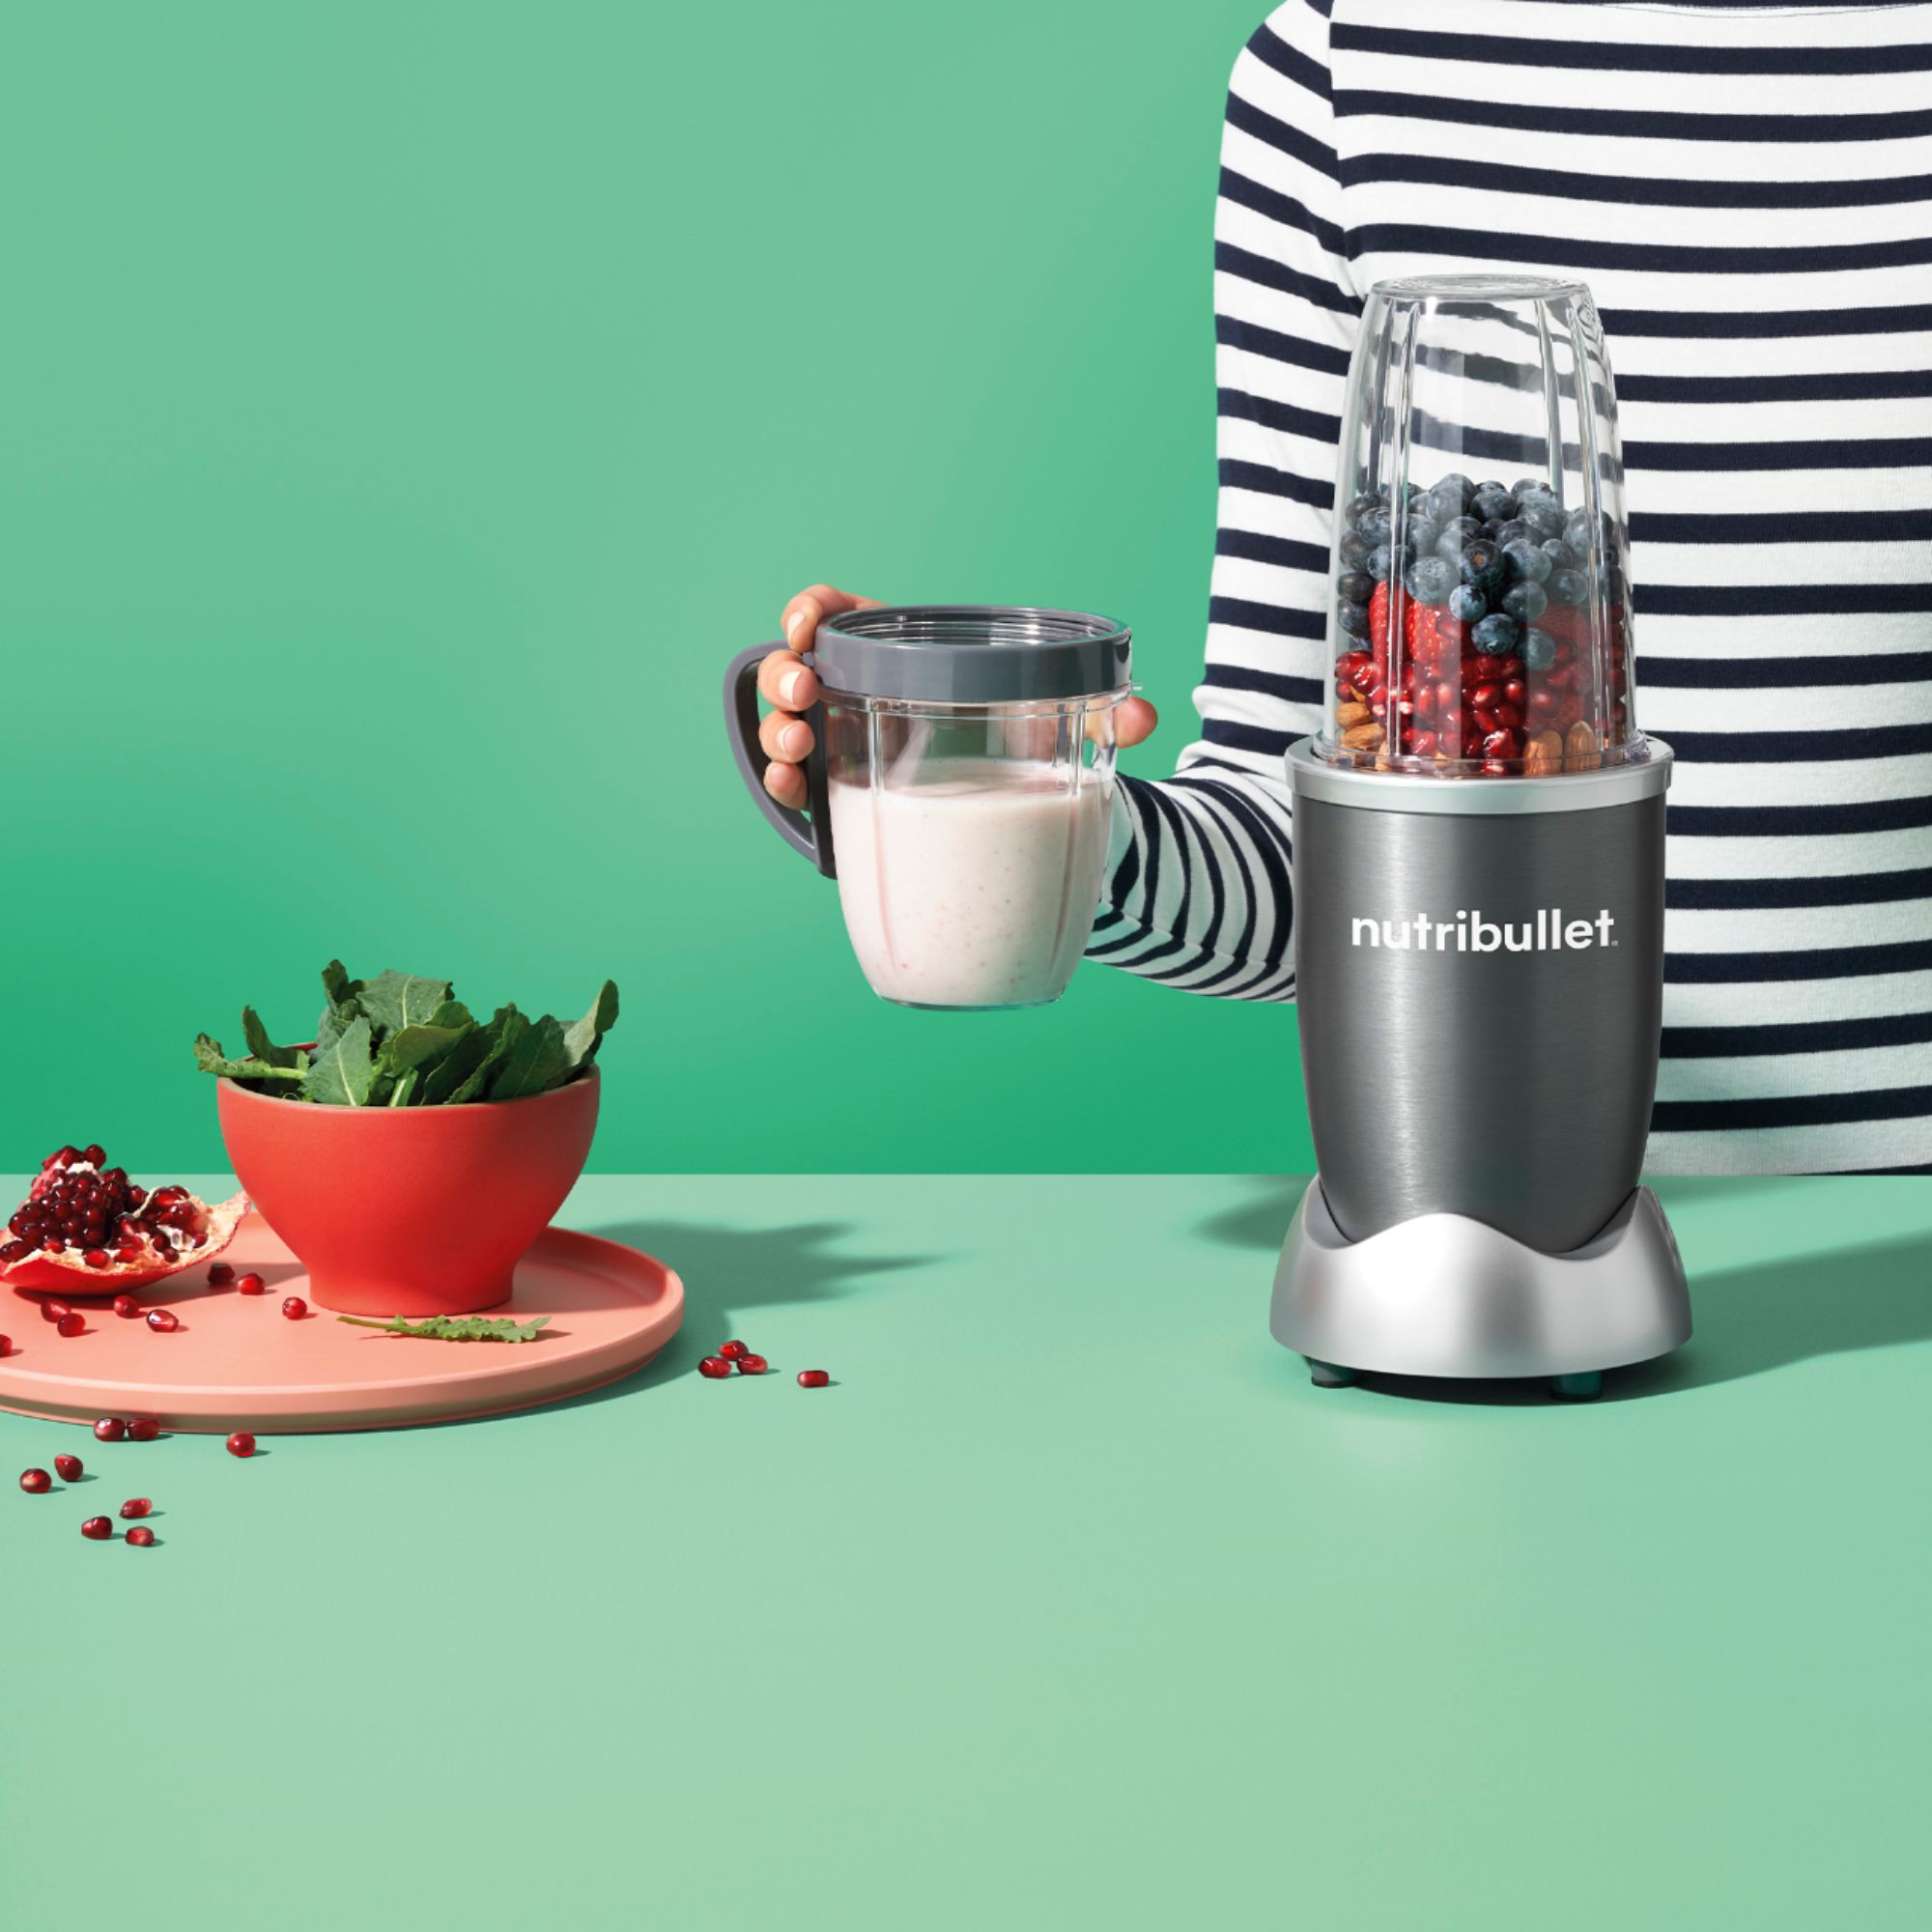 NutriBullet 600W 4pc Certified Reconditioned Food Blender